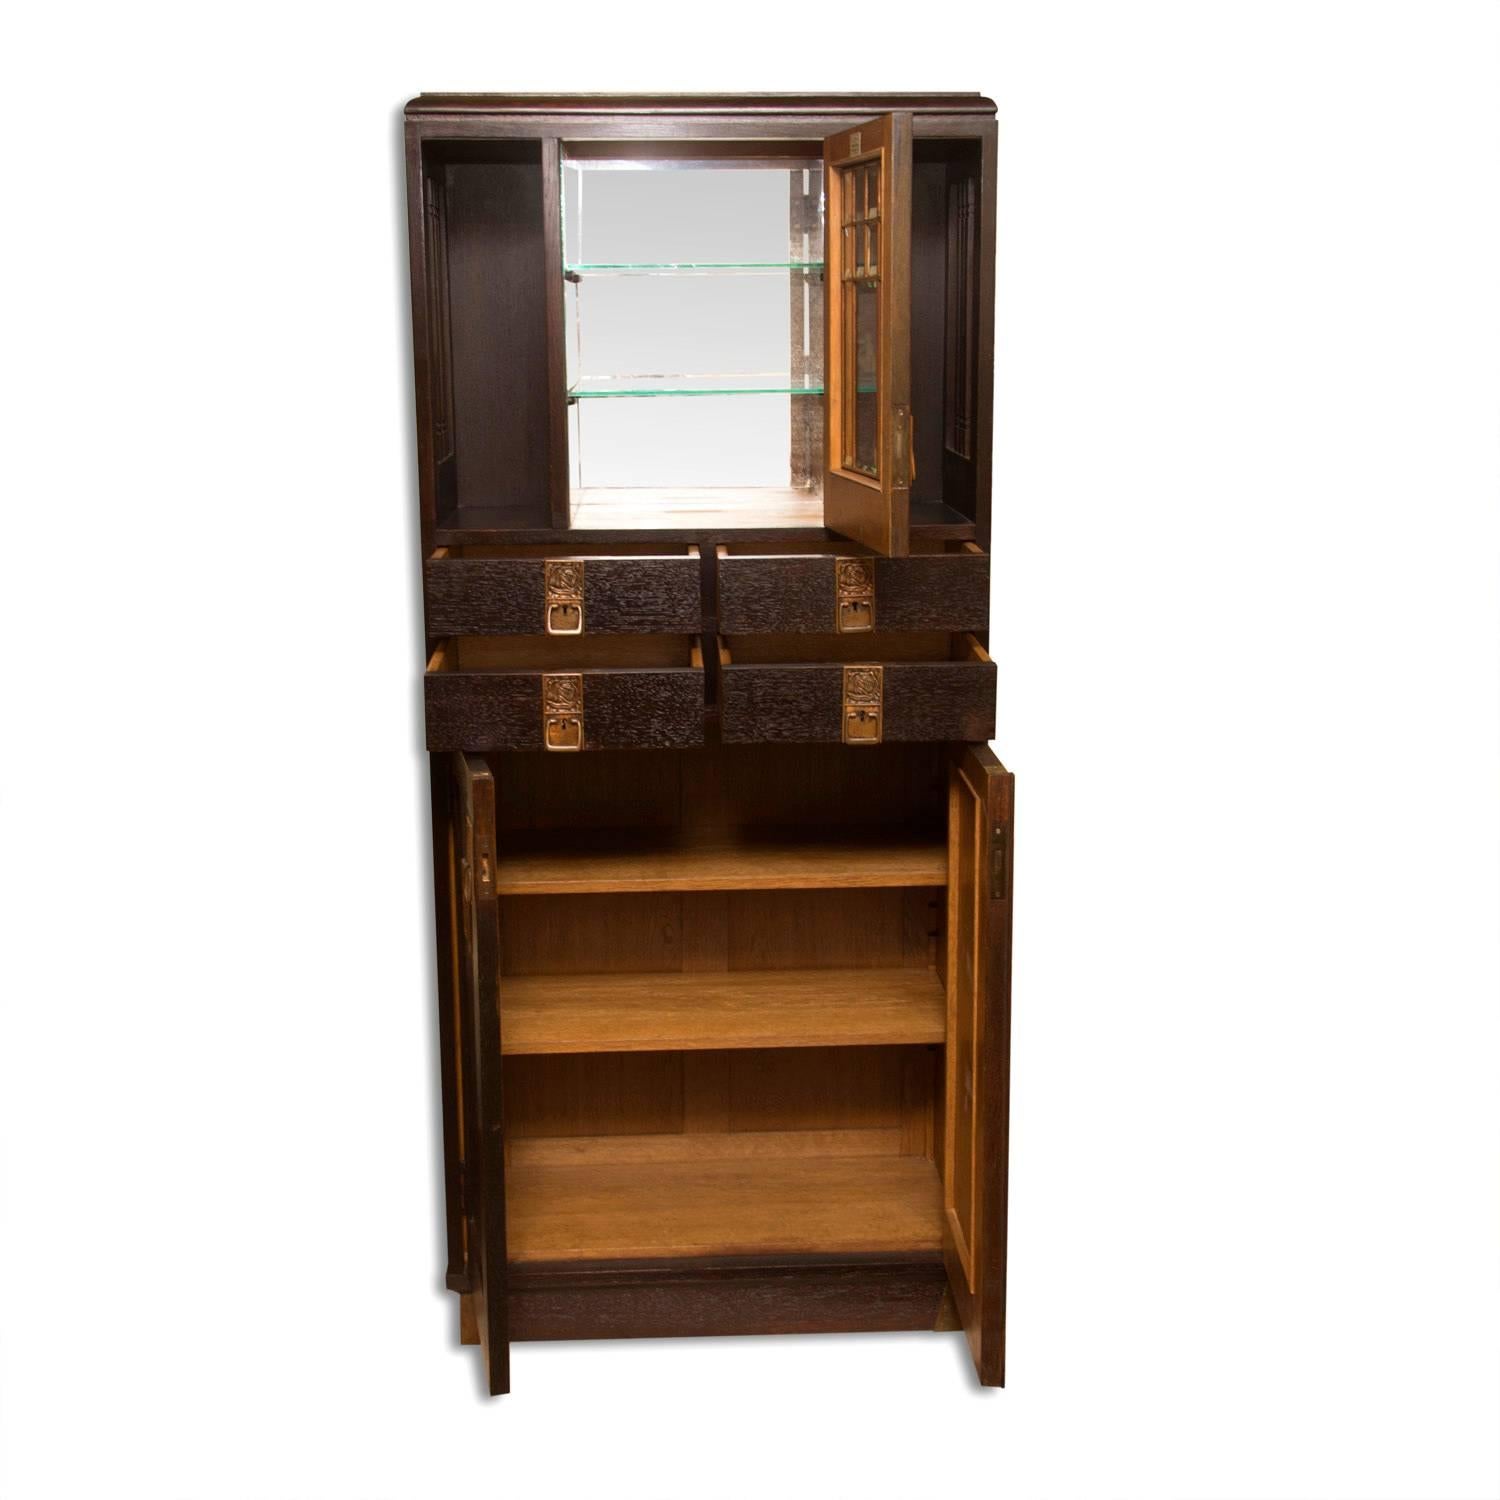 Vienna Secession Early 20th Century Viennese Secession Bar Cabinet or Sideboard in Oak, 1910